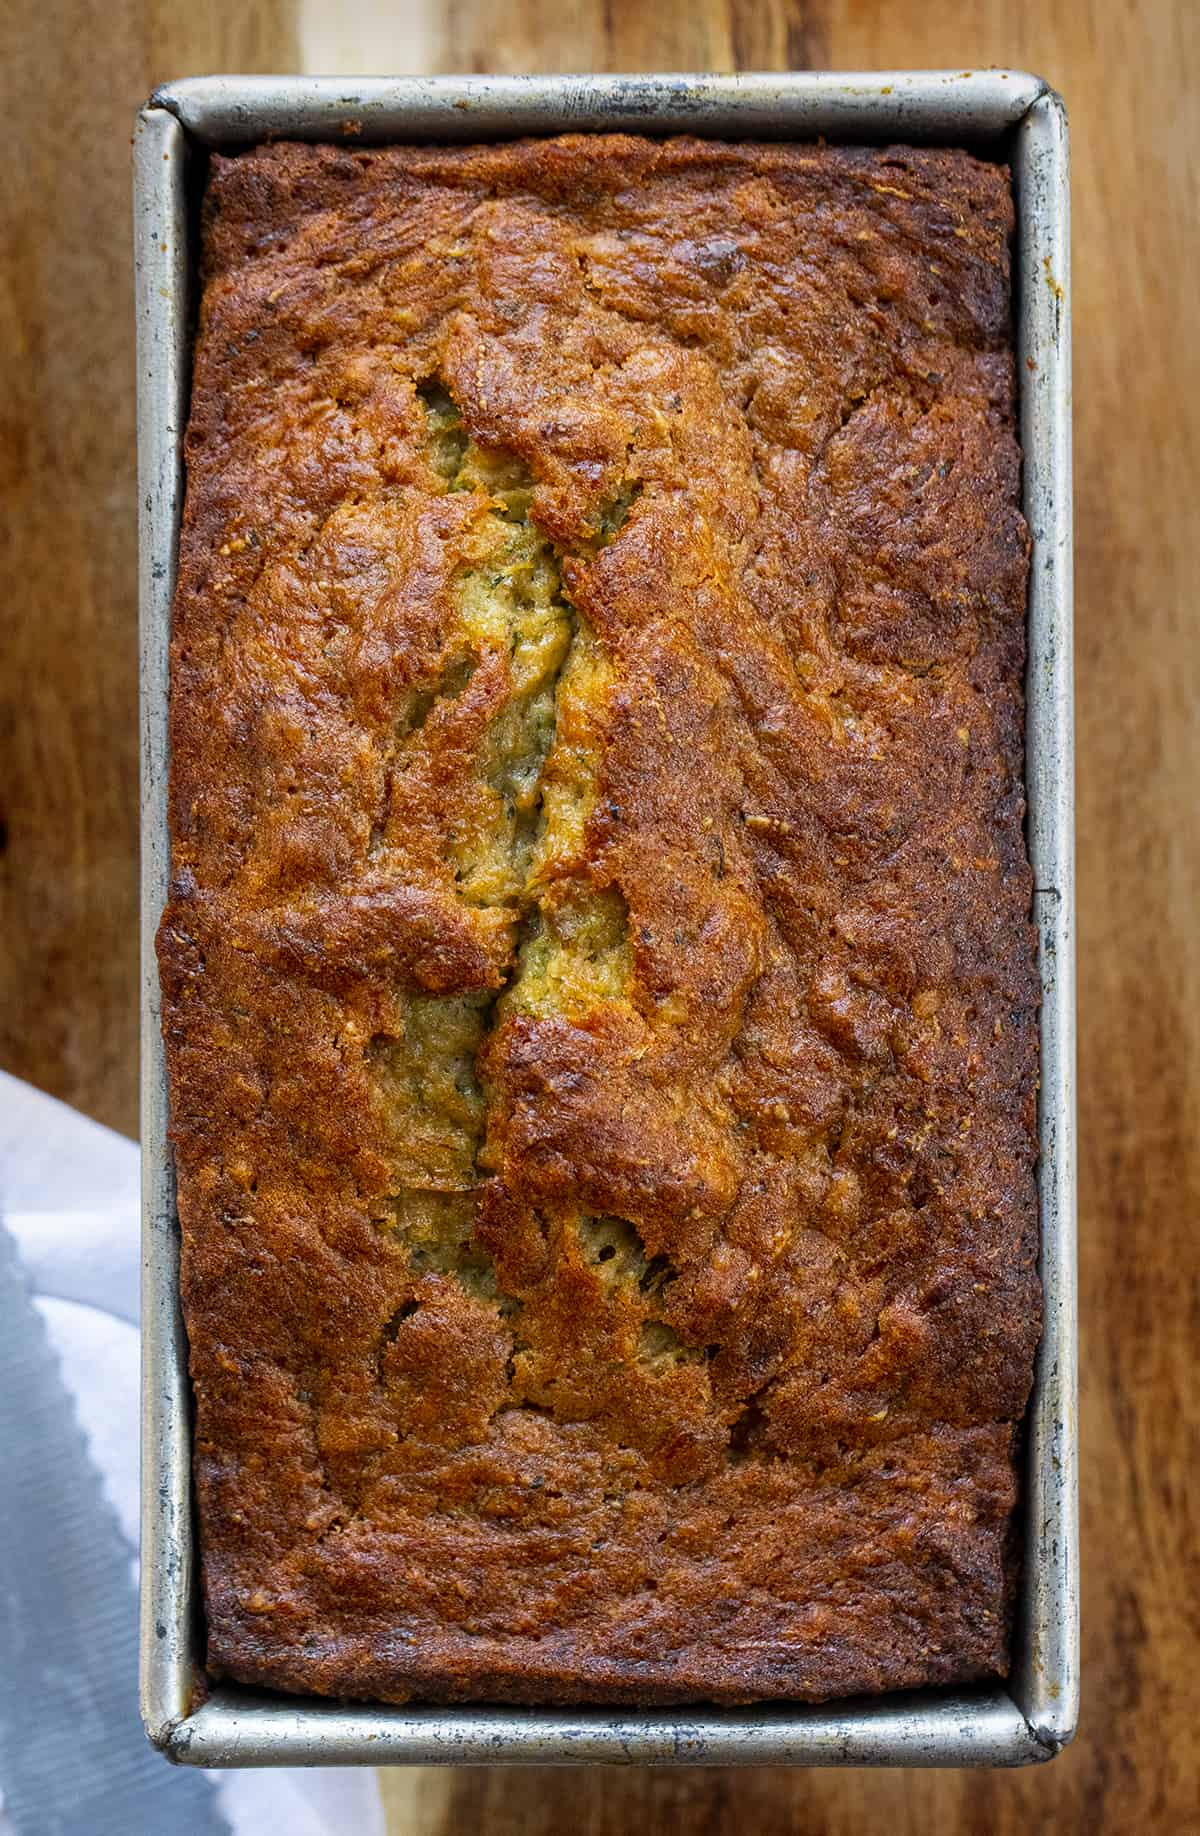 Loaf of Banana Zucchini Bread in Pan on Wood Cutting Board. Quick Bread, Banana Bread, Zucchini Bread, Baking, Zucchini Recipes, How to Bake with Zucchini, Easy Bread Recipe, Easy Zucchini Bread, Dessert, Snack, i am baker, iambaker